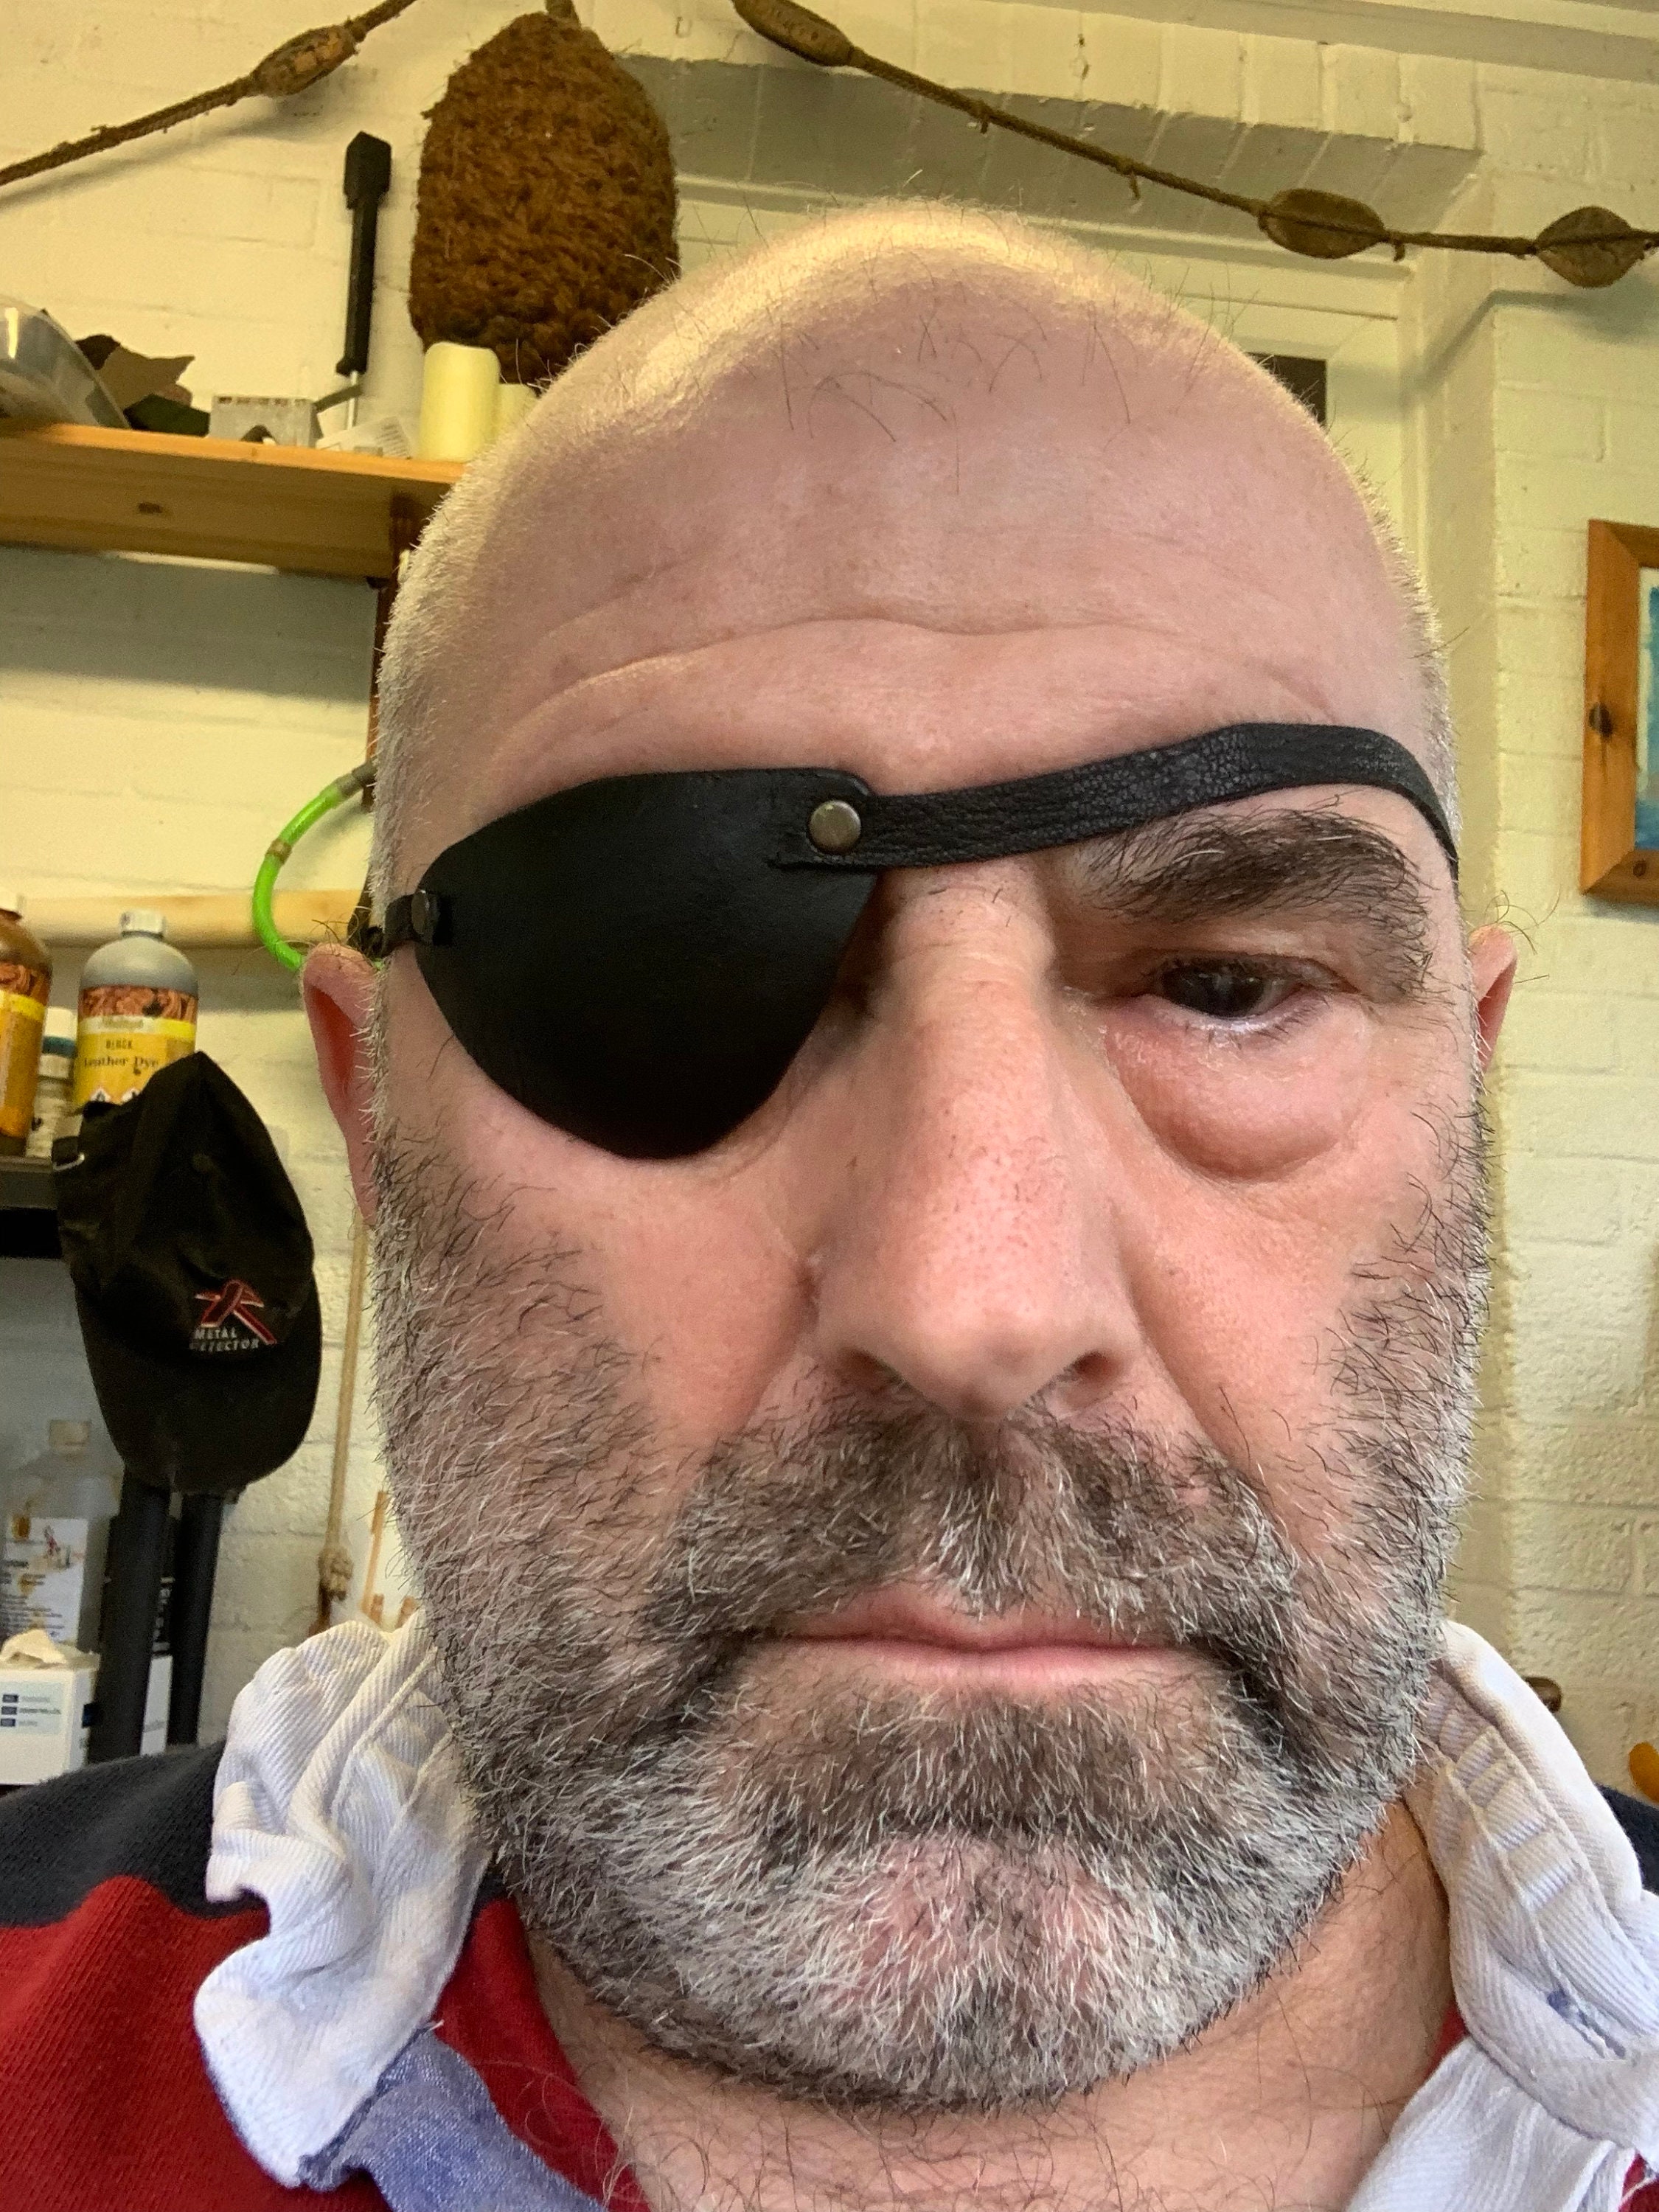 Moncle Eye Patch with Gears